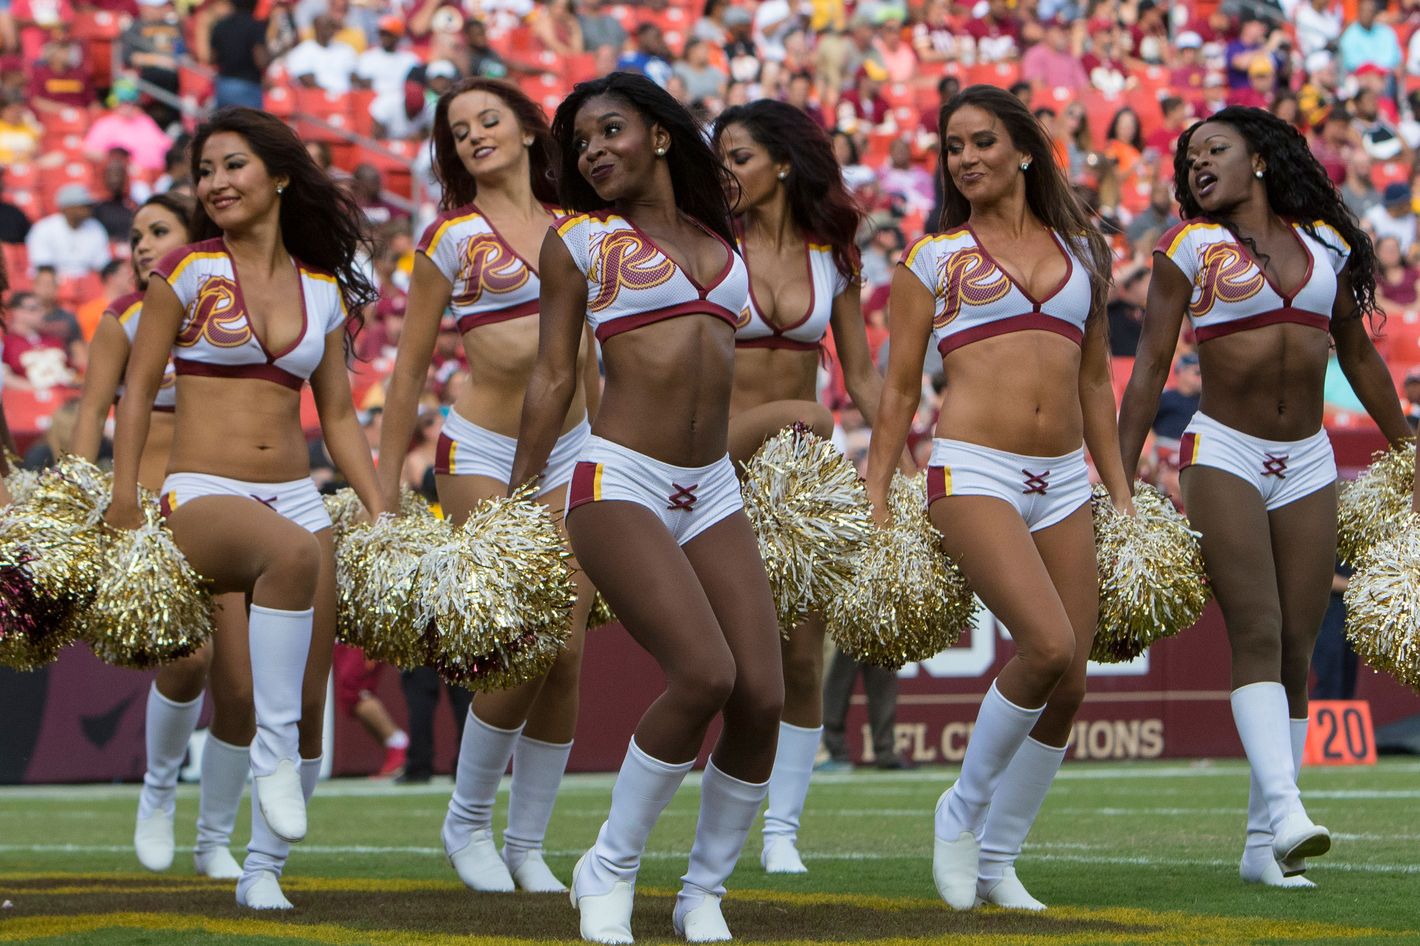 Ex-Cheerleaders Fight Back Against the NFL